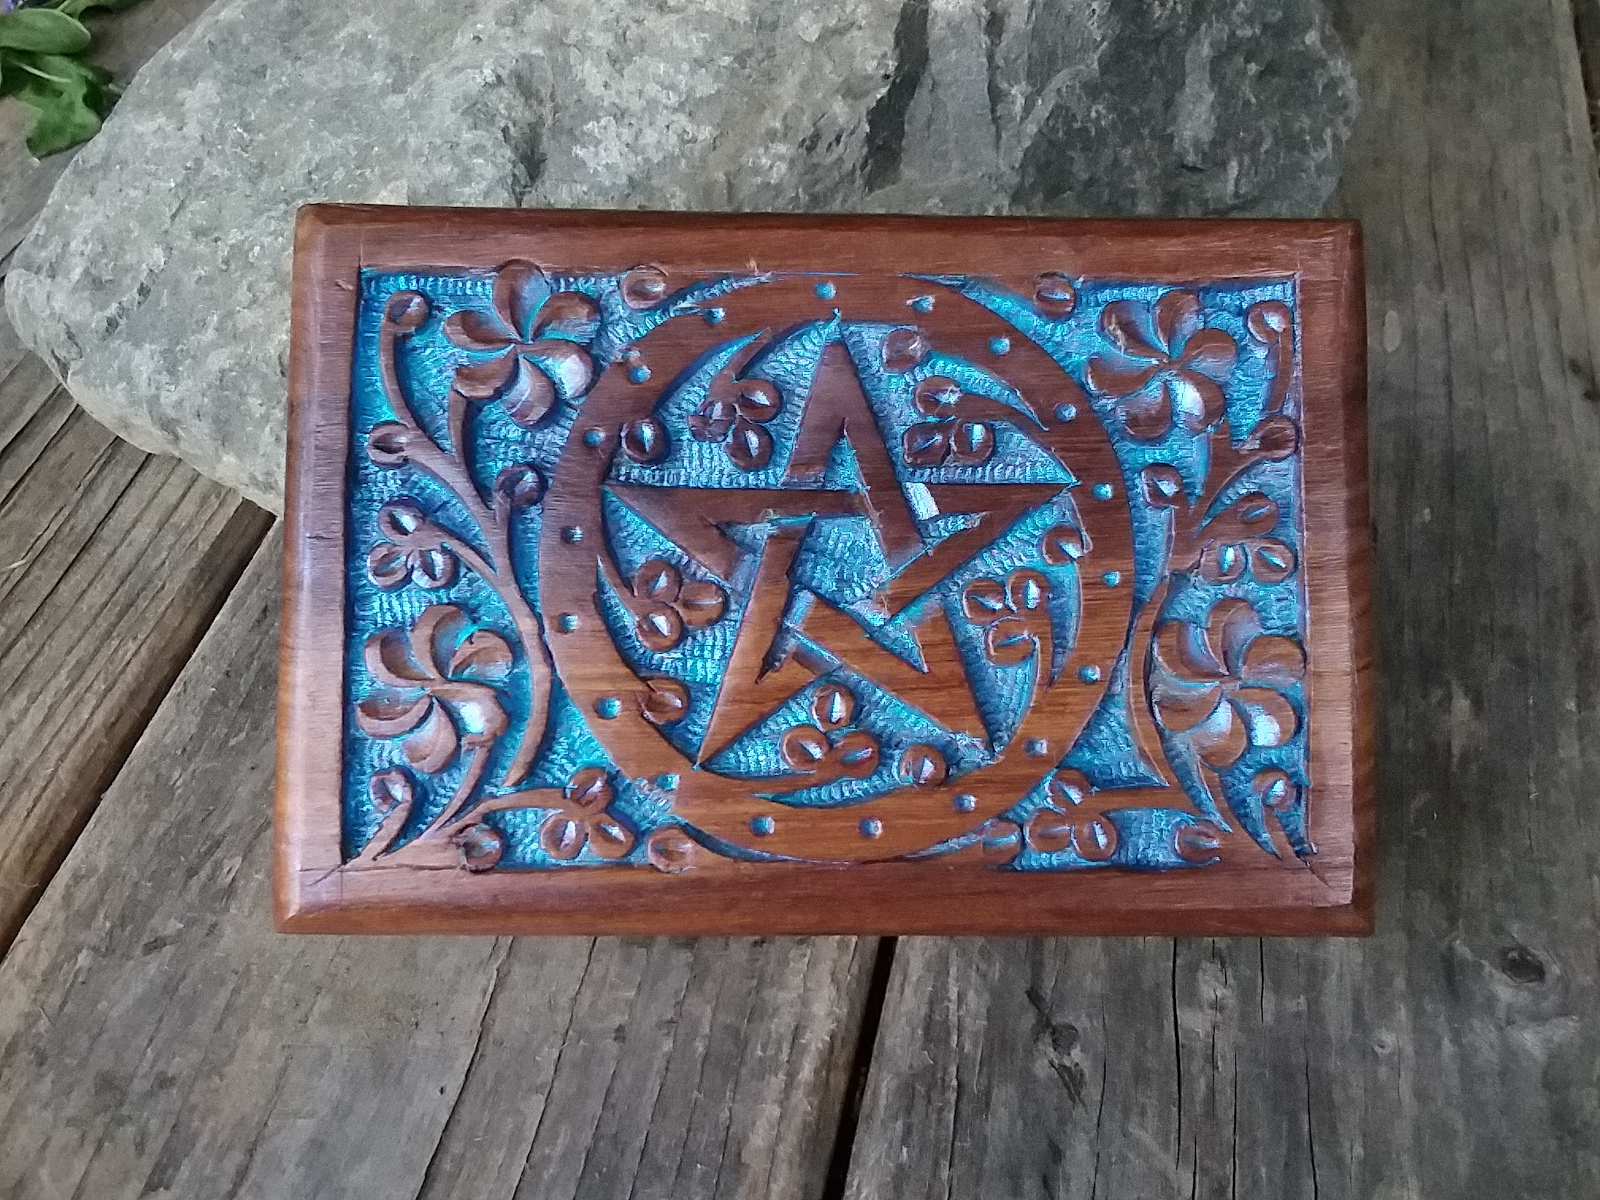 Pentacle floral carved wood box 4x6 Blue finish